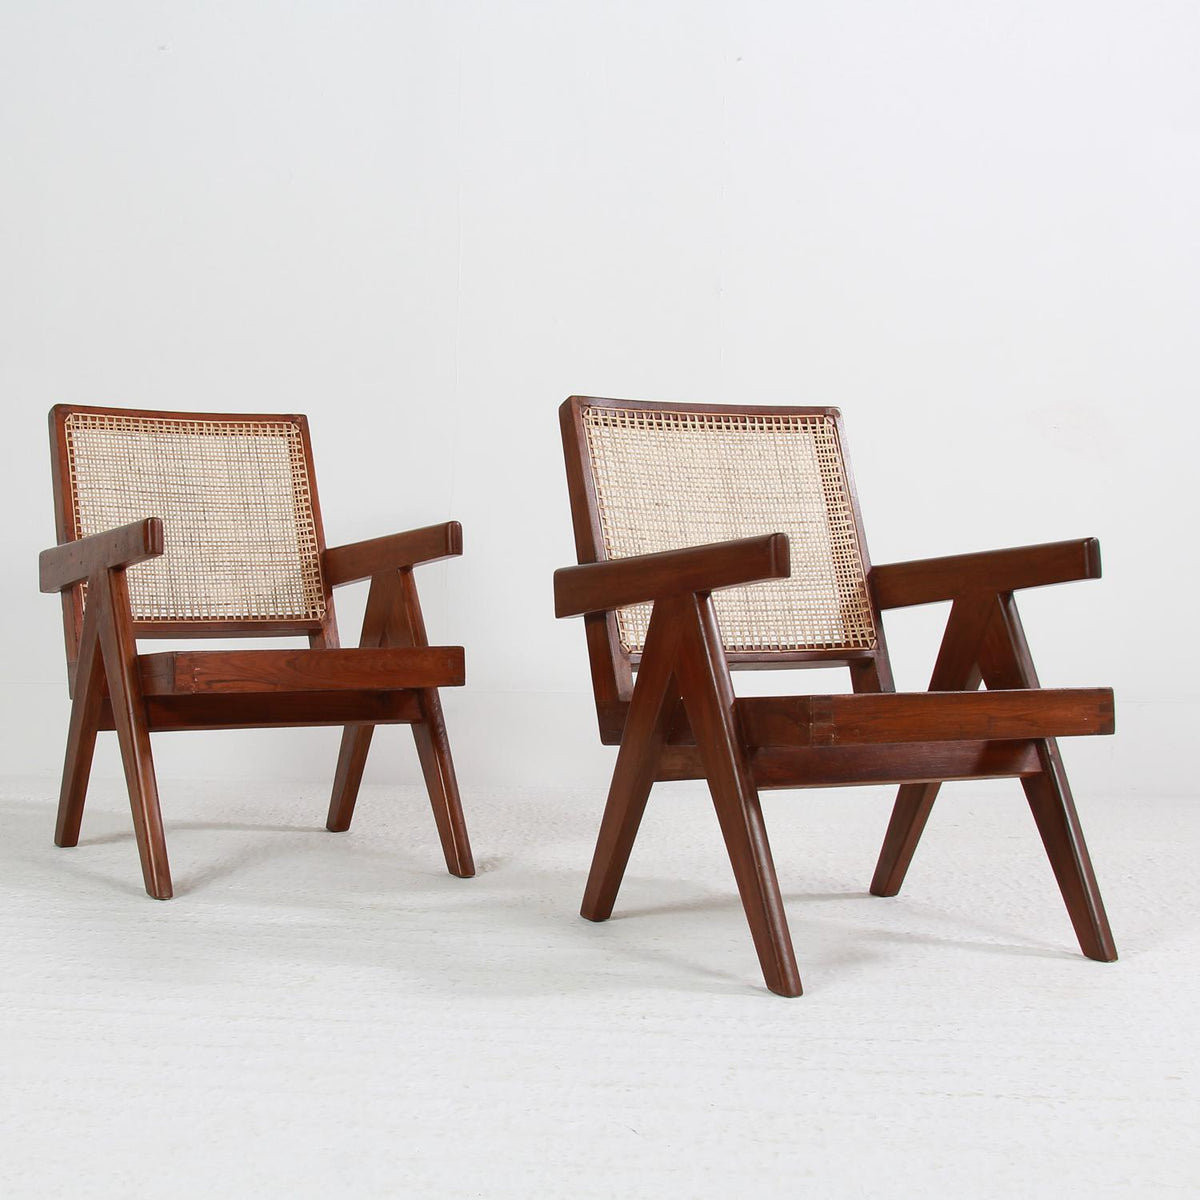 Rare Pair of Pierre Jeanneret Mid-Century Easy Chairs in Teak